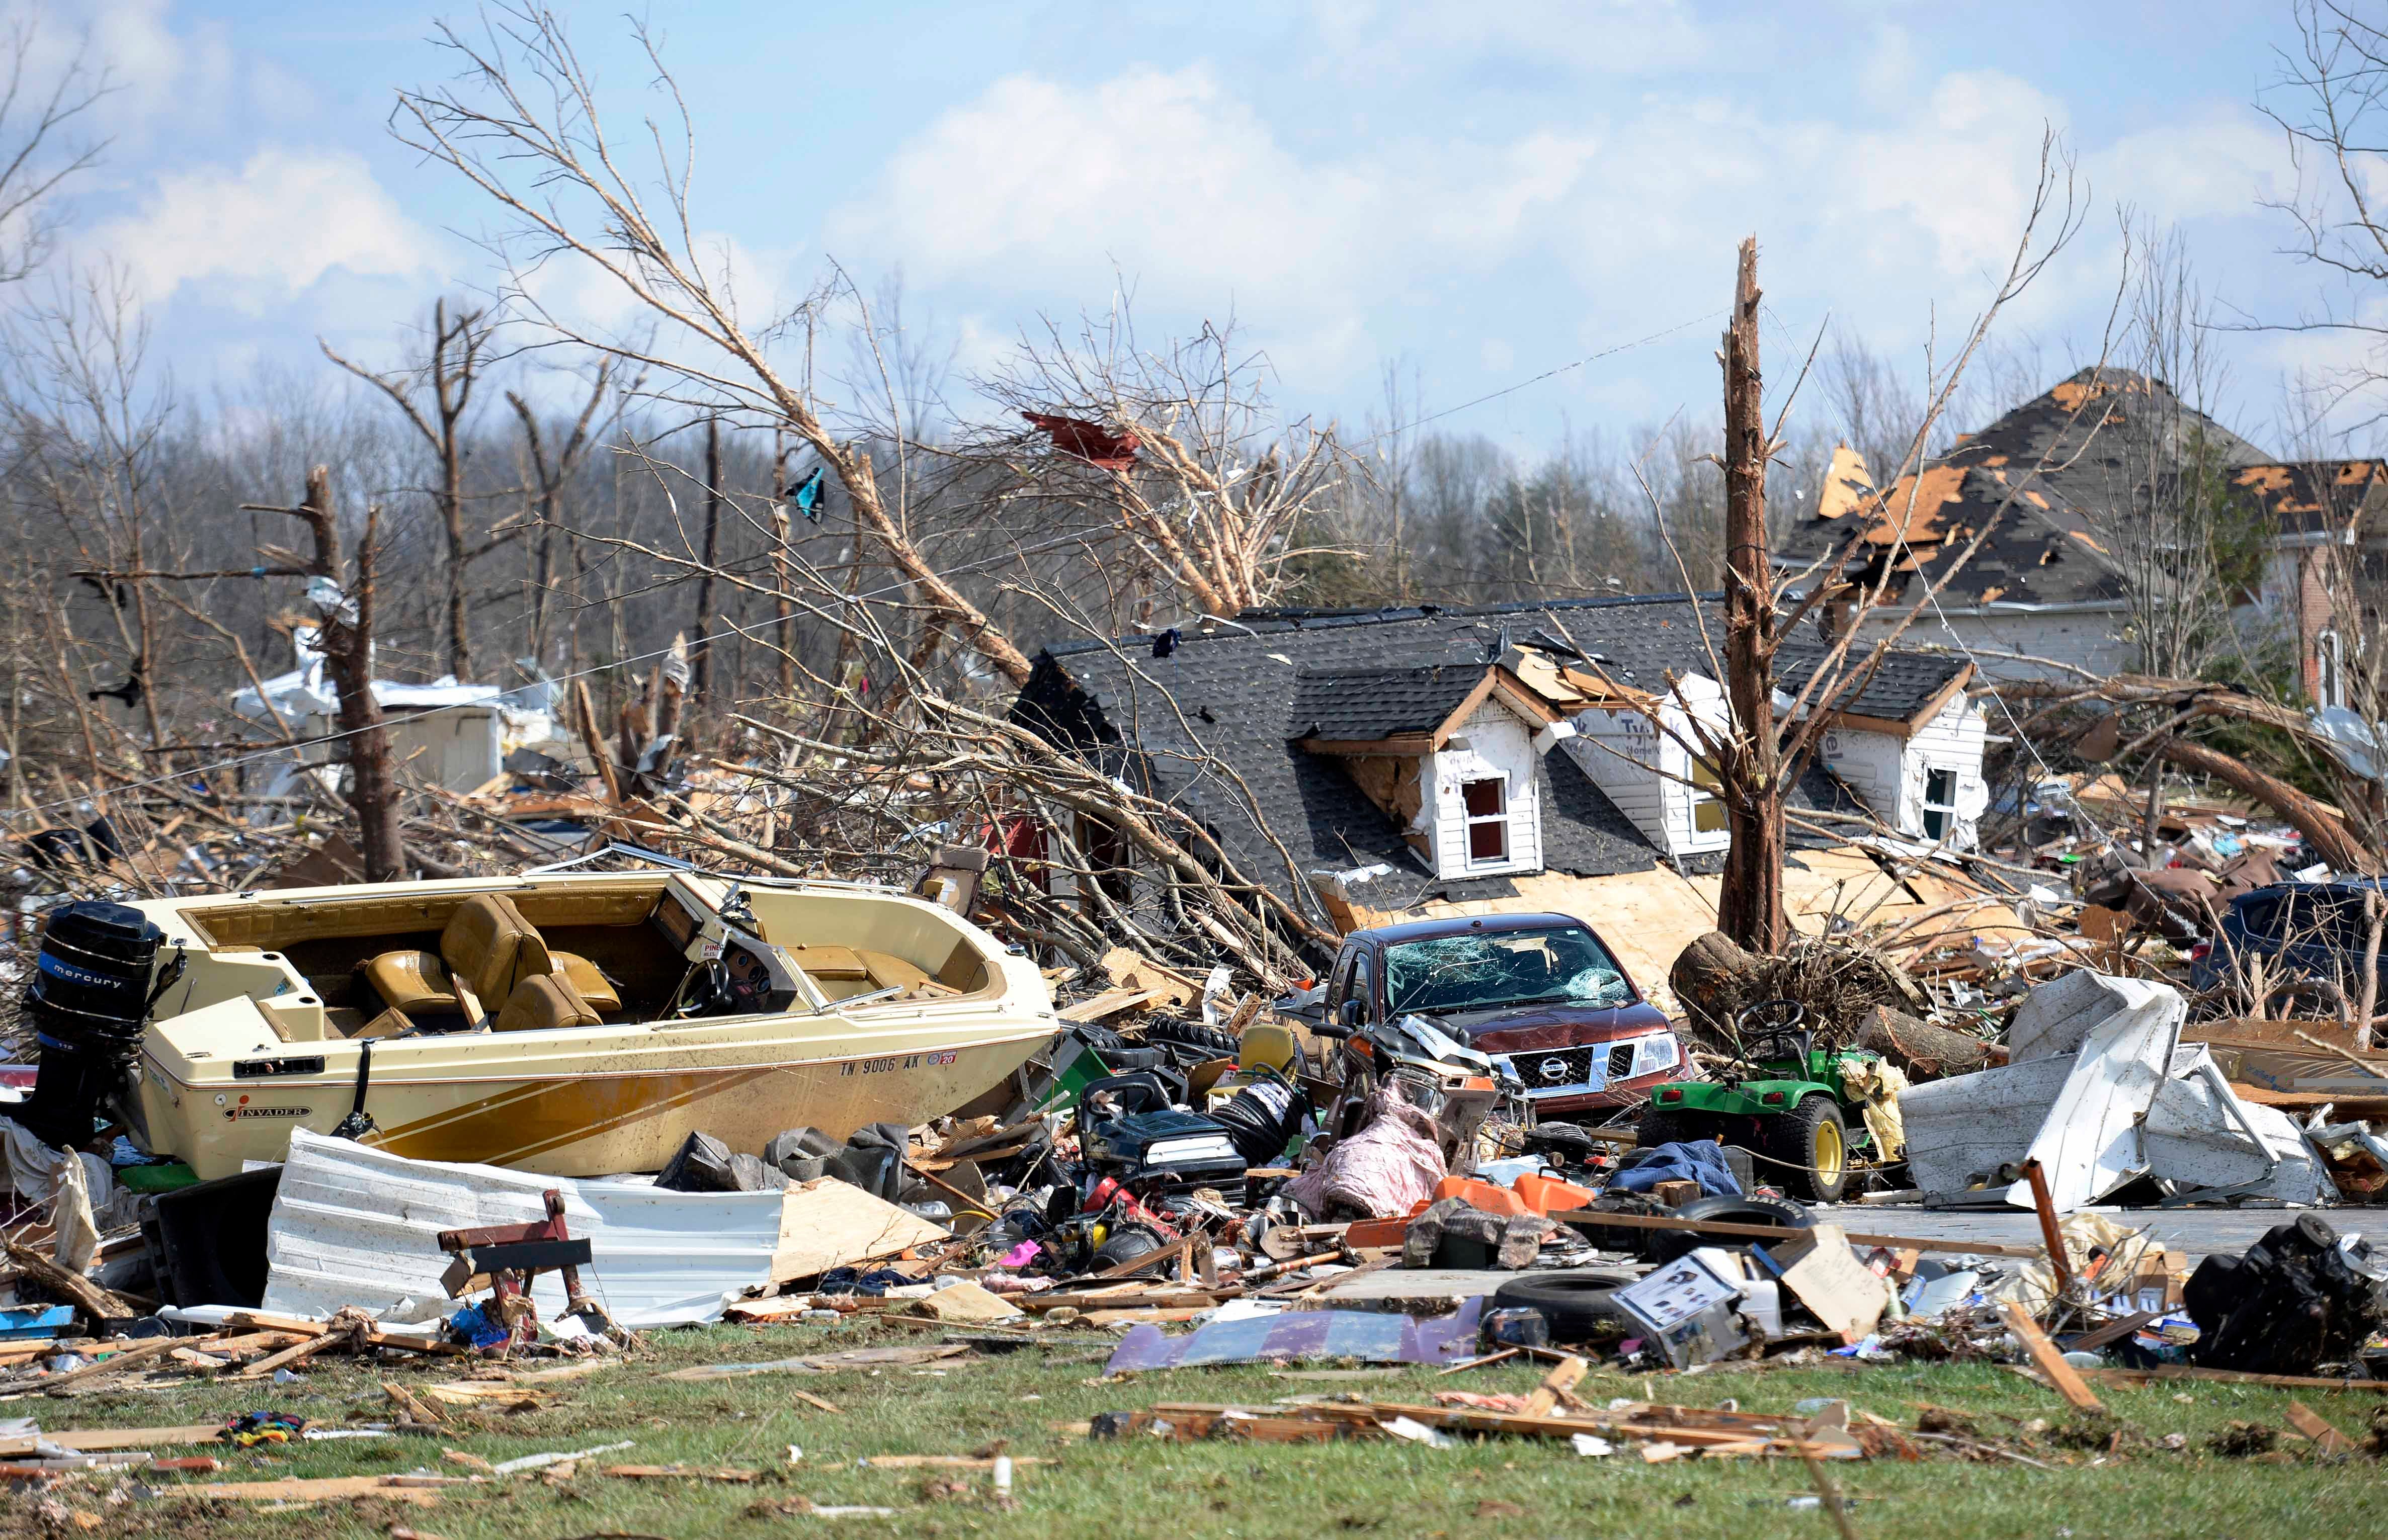 Tennessee Tornado was ’Violent’ EF4 That Hit Putnam County With 175